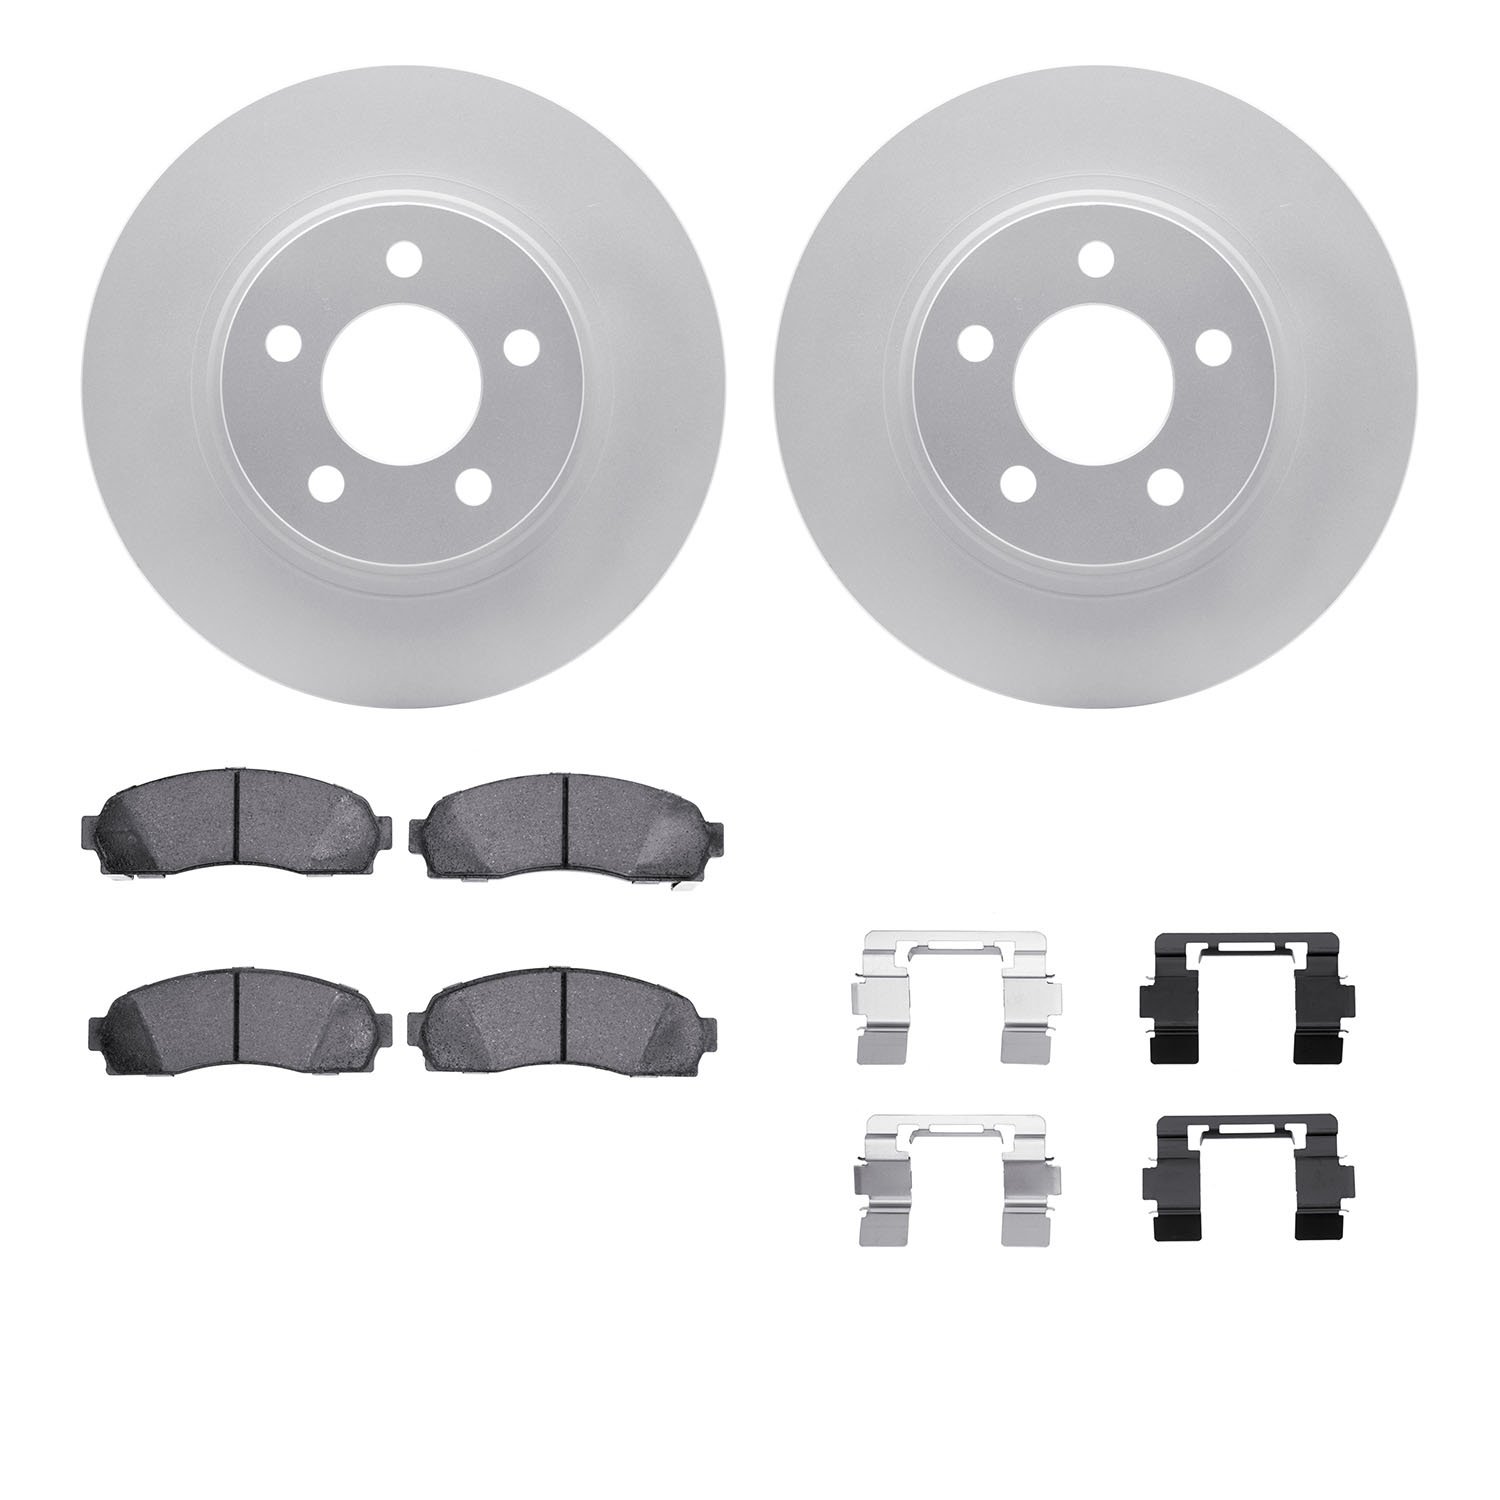 4412-54034 Geospec Brake Rotors with Ultimate-Duty Brake Pads & Hardware, 2003-2011 Ford/Lincoln/Mercury/Mazda, Position: Front